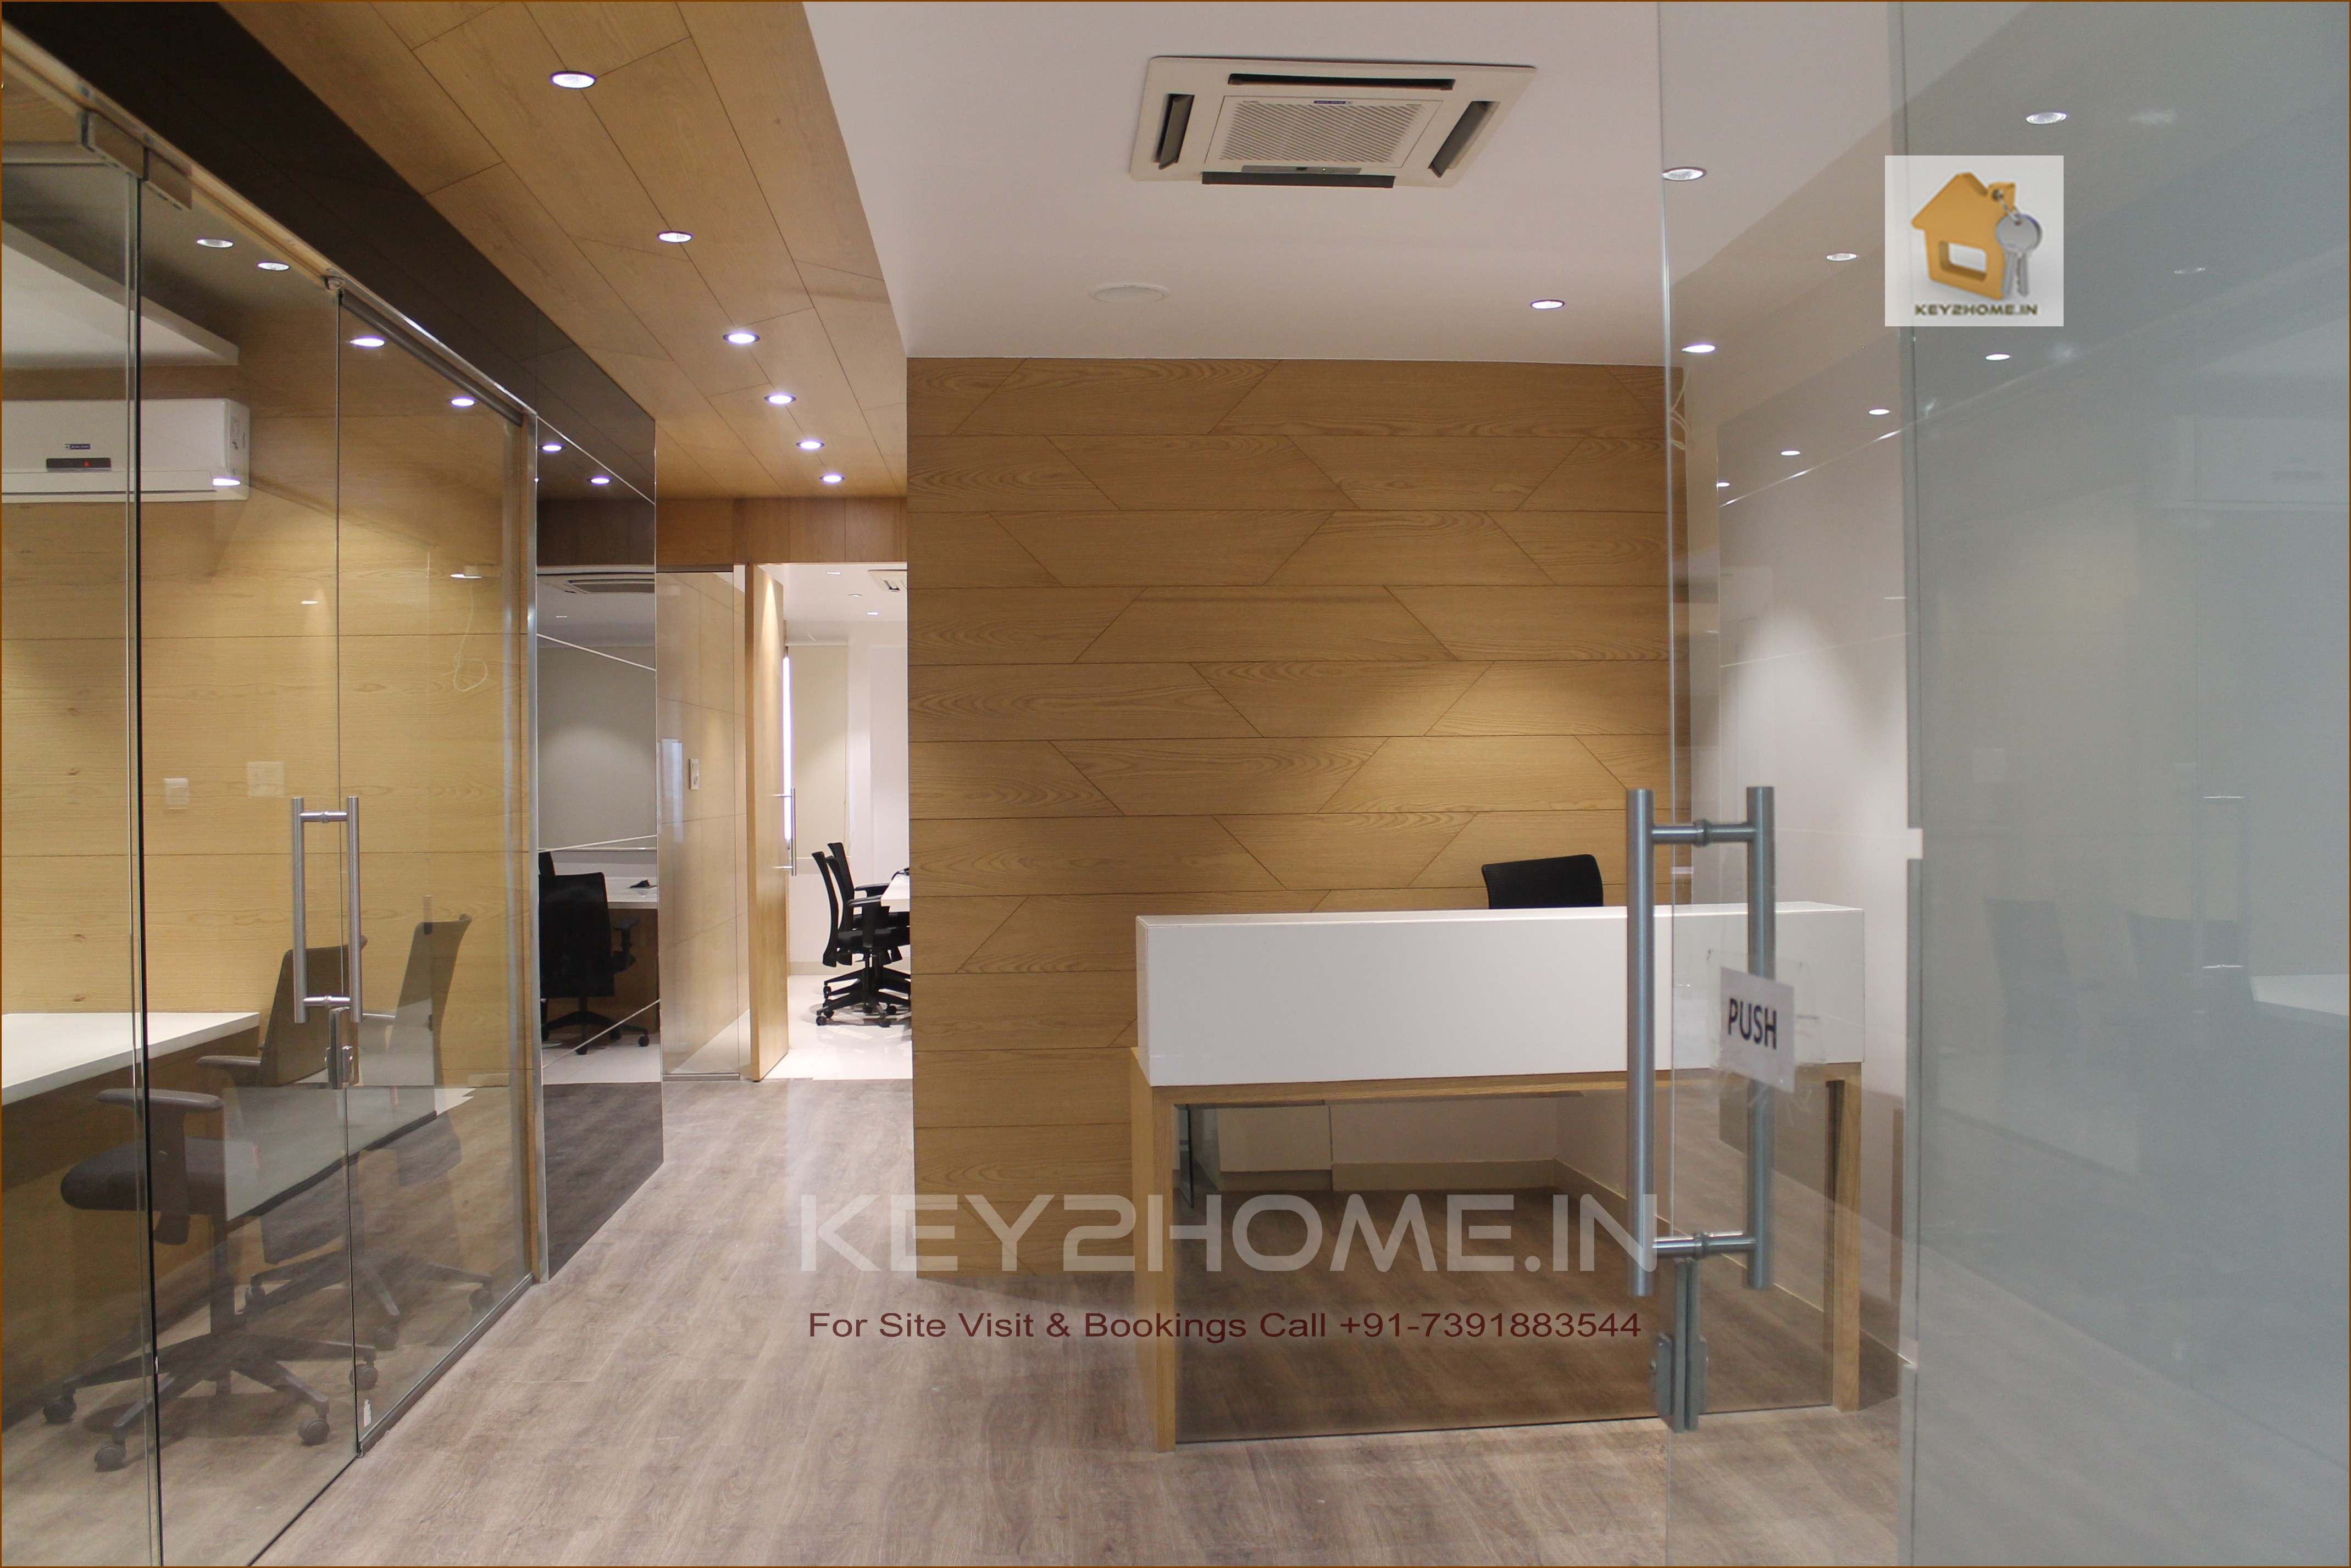 Commercial Office space on rent in Hinjewadi near wakad bridge entrance and front desk